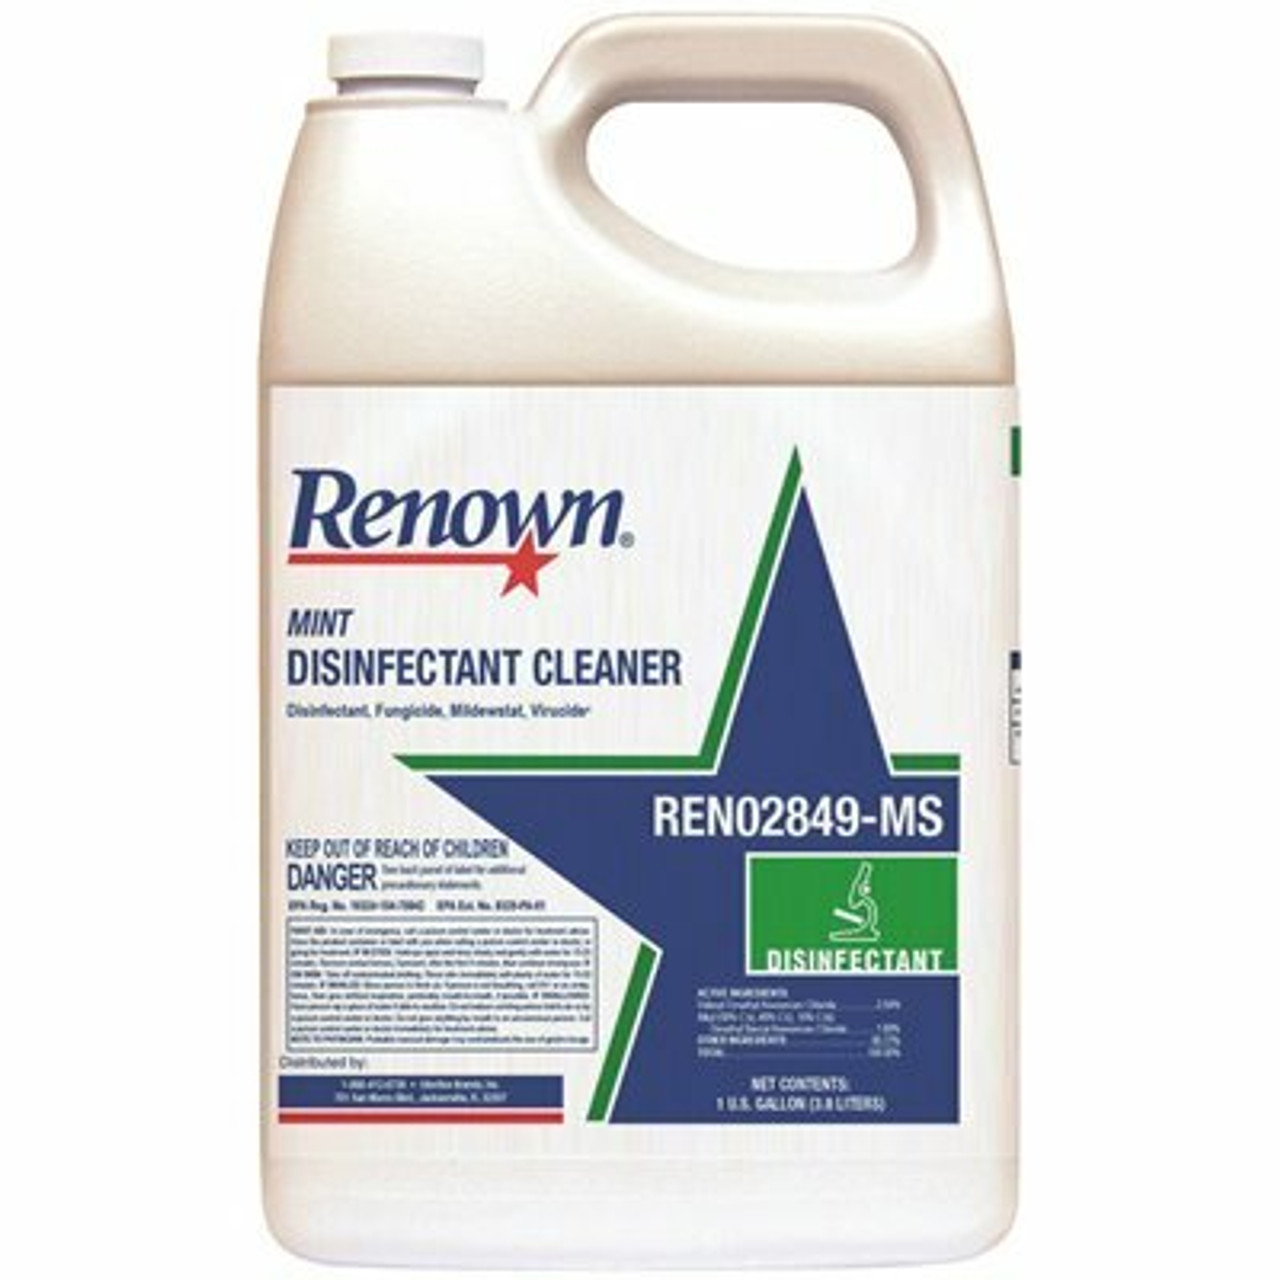 Renown 128 Oz. Mint Disinfectant Cleaner